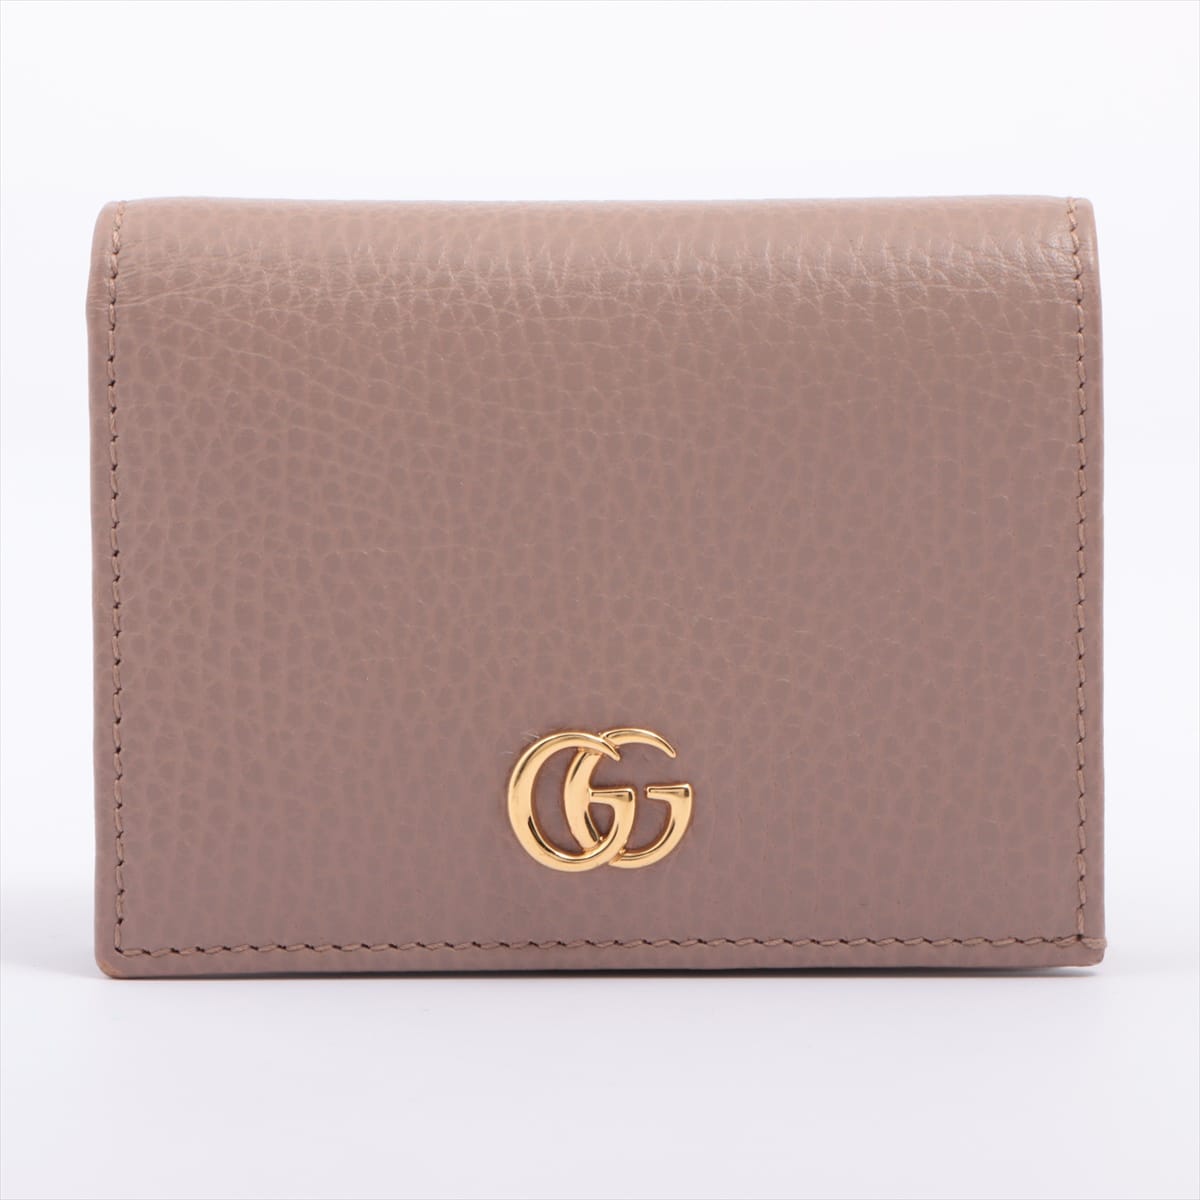 Gucci GG Marmont 456126 Leather Compact Wallet Beige